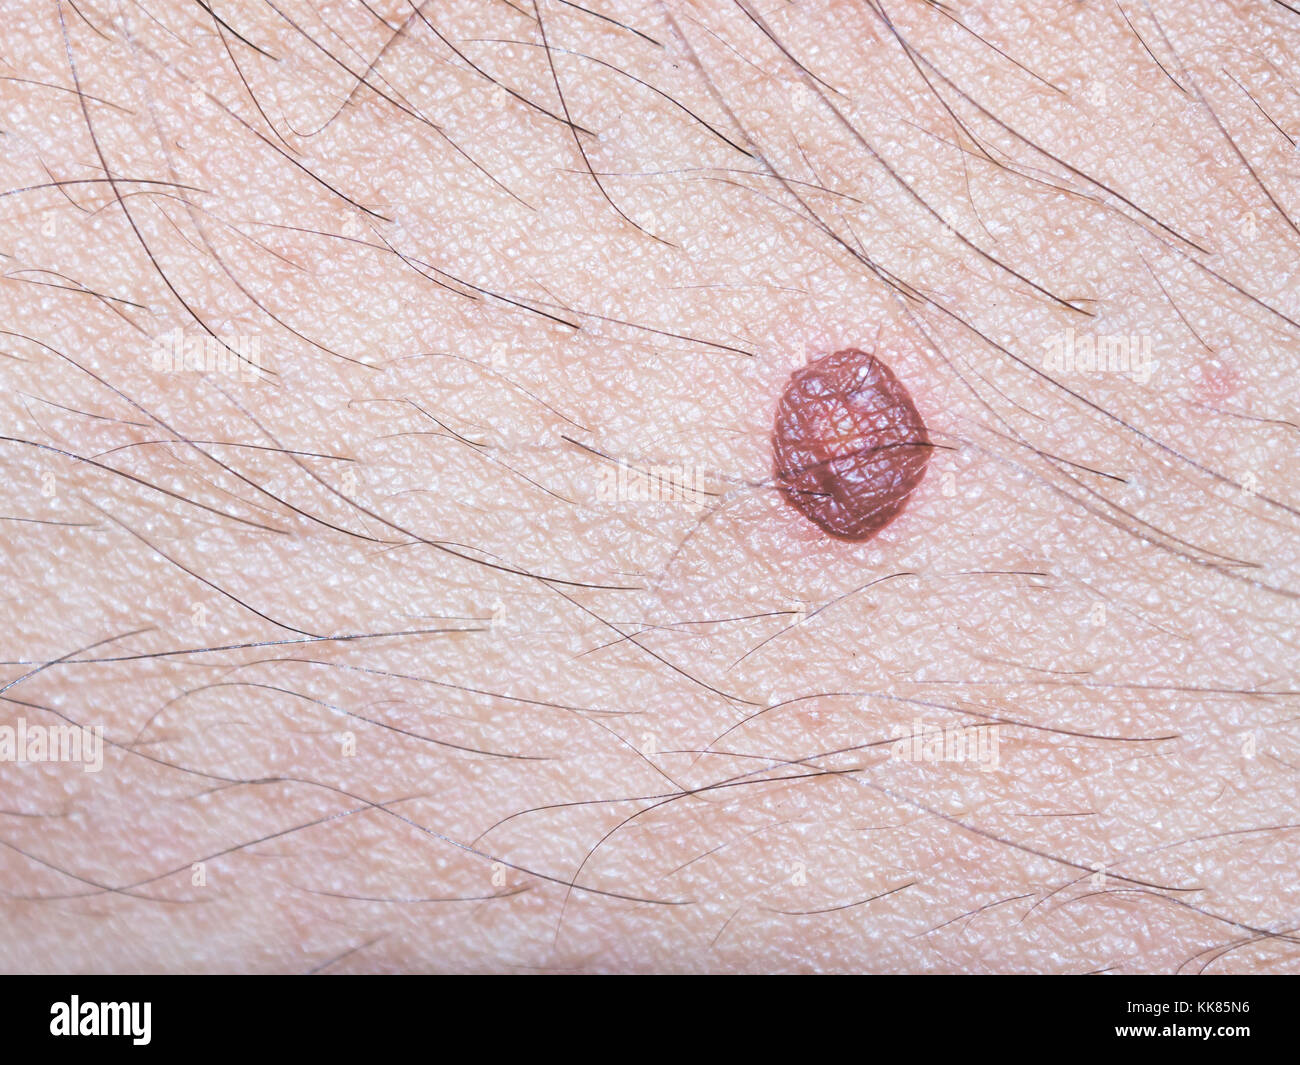 Closeup of Burn scald,Wounds caused by scalding hot water. Stock Photo